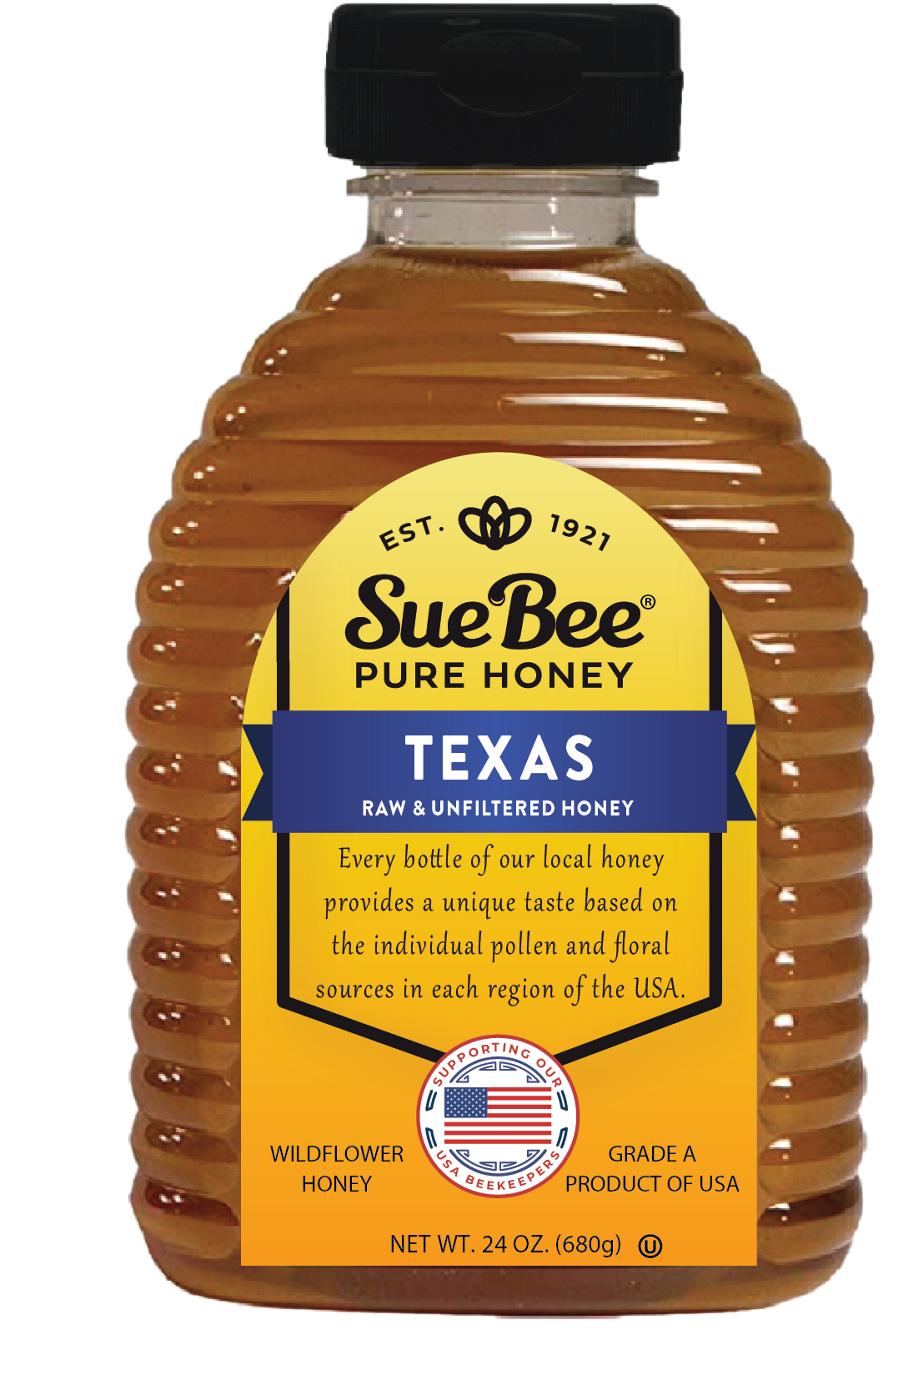 Sue Bee Raw & Unfiltered Texas Wildflower Honey; image 1 of 2